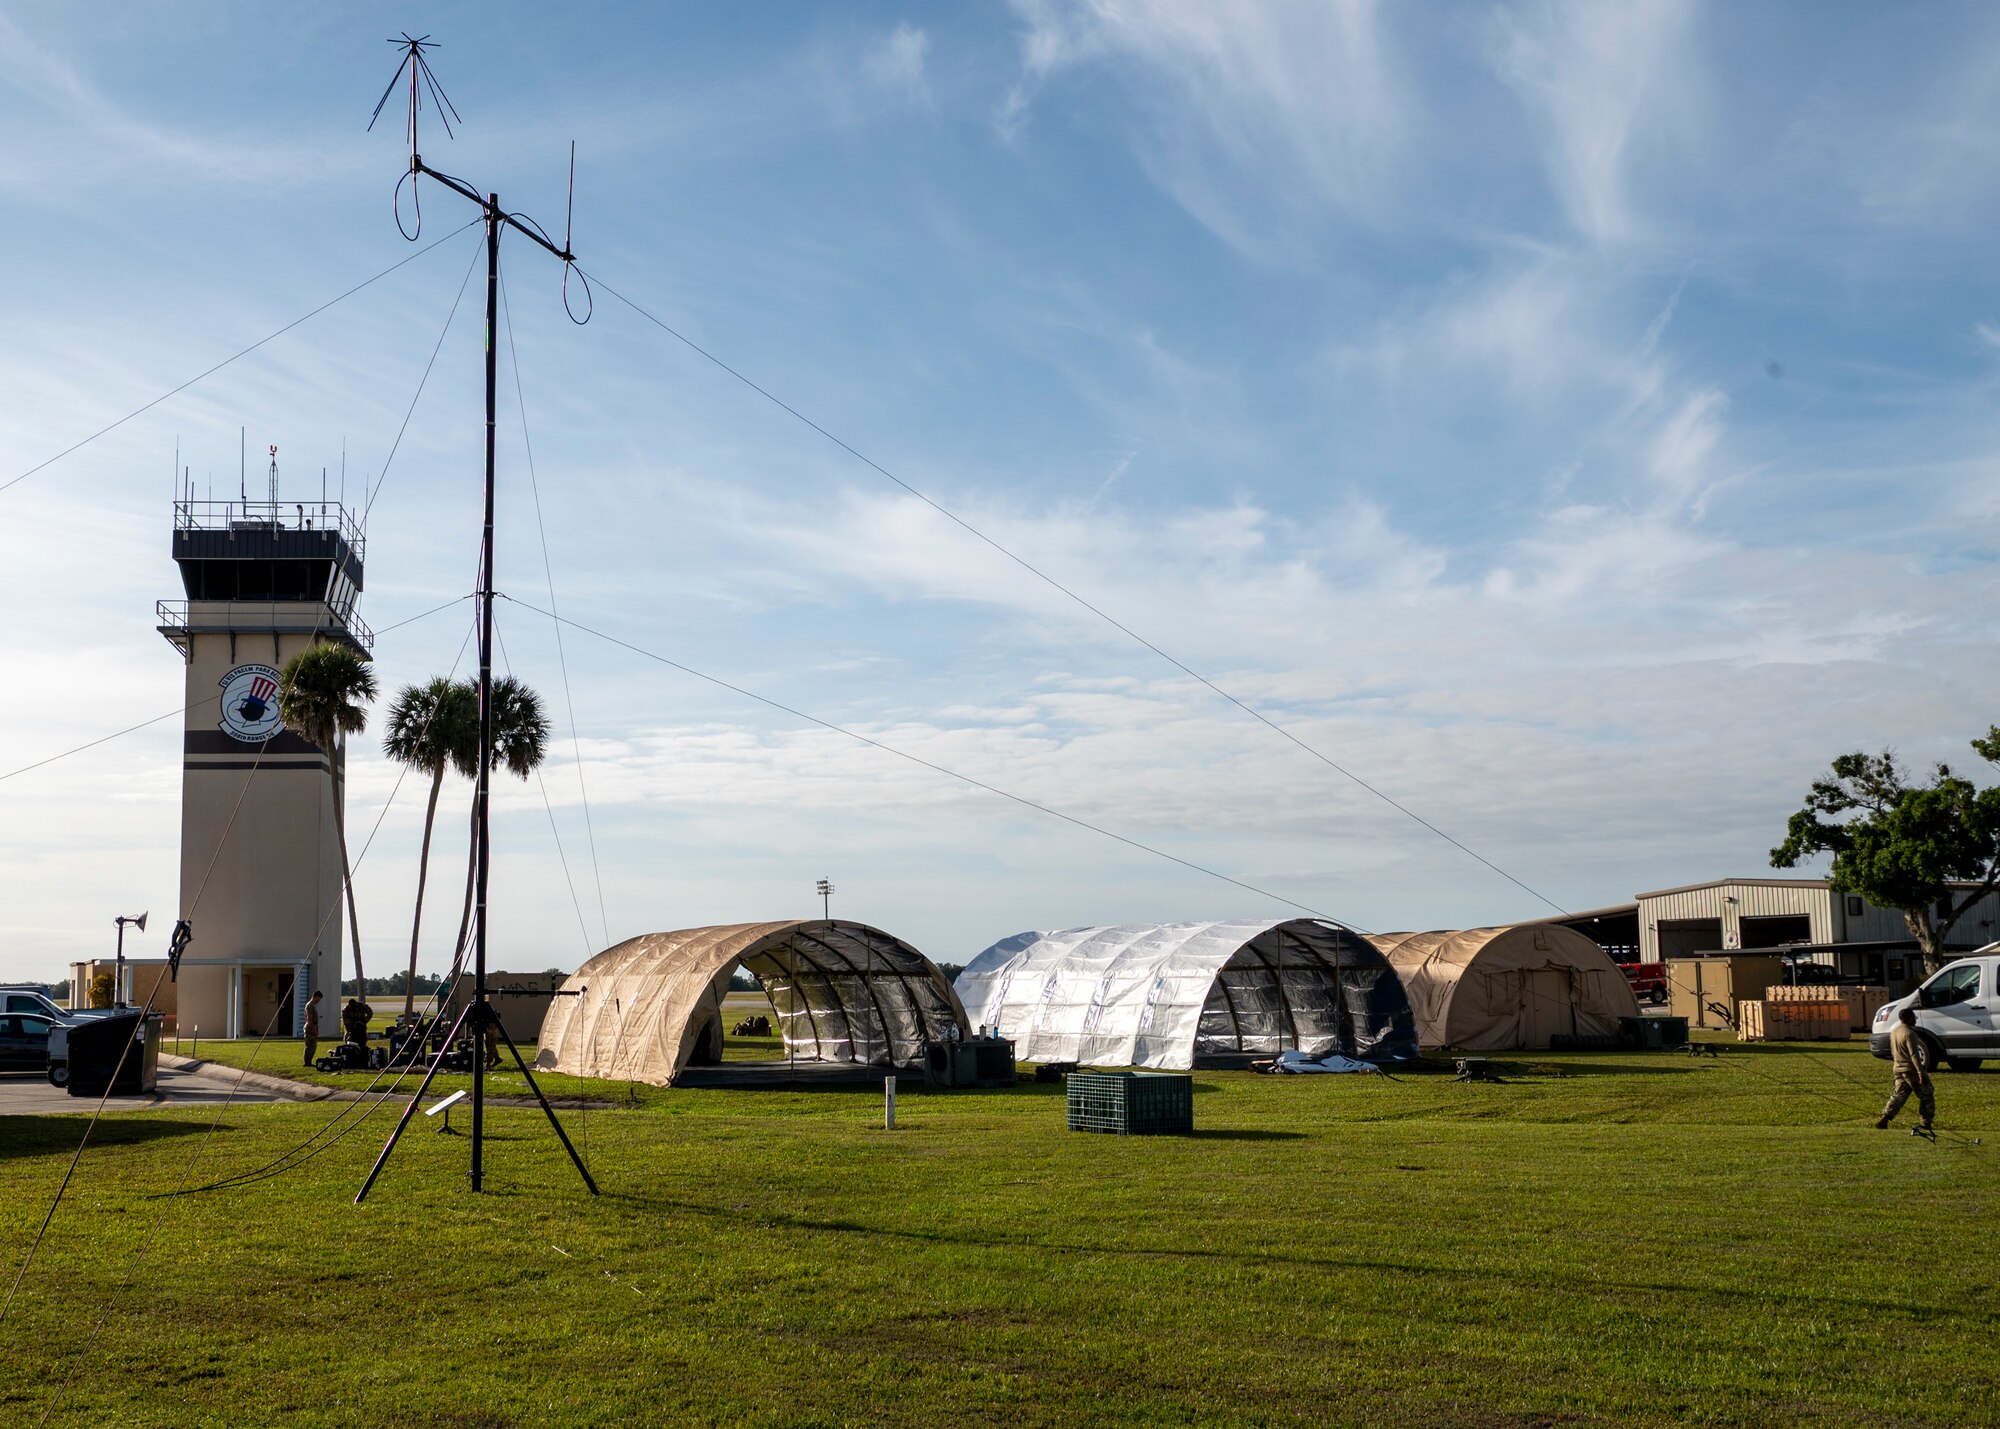 U.S. Air Force Airmen assigned to the 23rd Wing, Moody Air Force Base, Georgia, establish communications equipment and shelters at Avon Park Air Force Range, Florida, for exercise Ready Tiger 24-1, April 9, 2024. Communications enable command and control, giving commanders the ability to direct operations from dispersed locations, enhancing the Air Force’s reach in large areas of responsibility. (U.S. Air Force photo by Airman 1st Class Leonid Soubbotine)